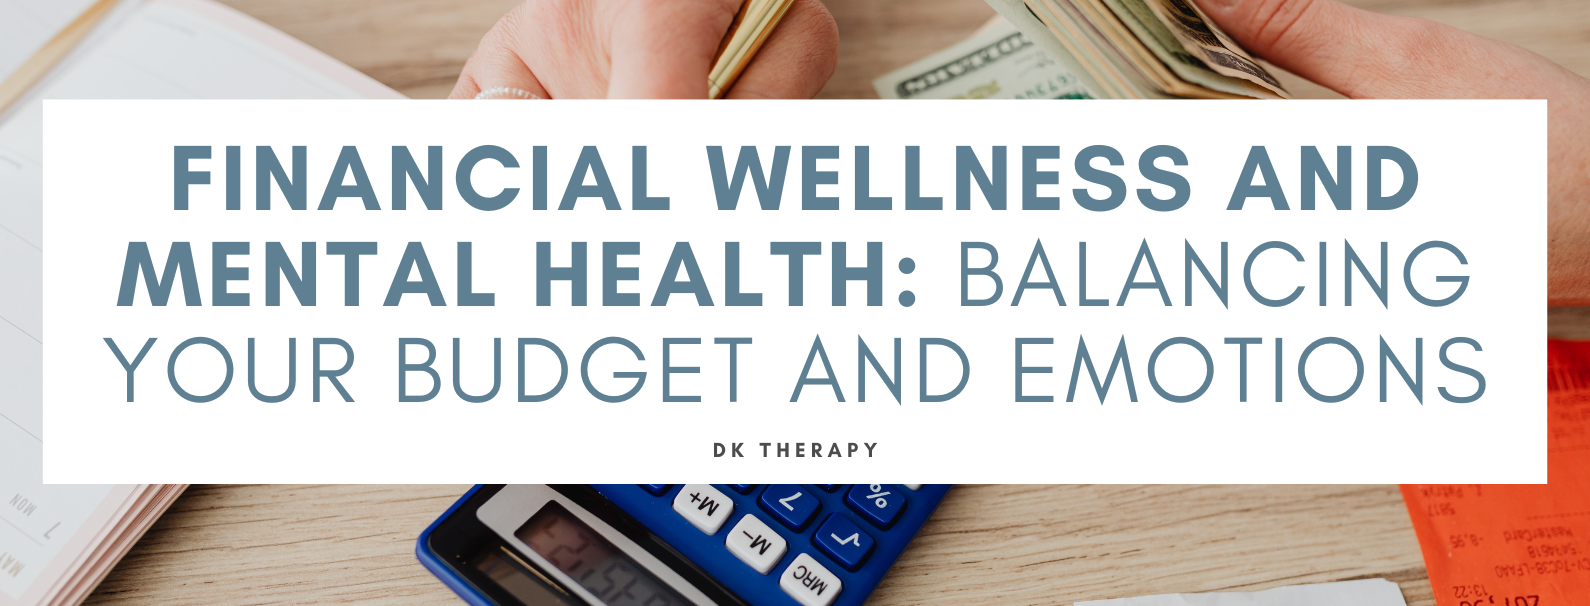 Financial Wellness and Mental Health_ Balancing Your Budget and Emotions